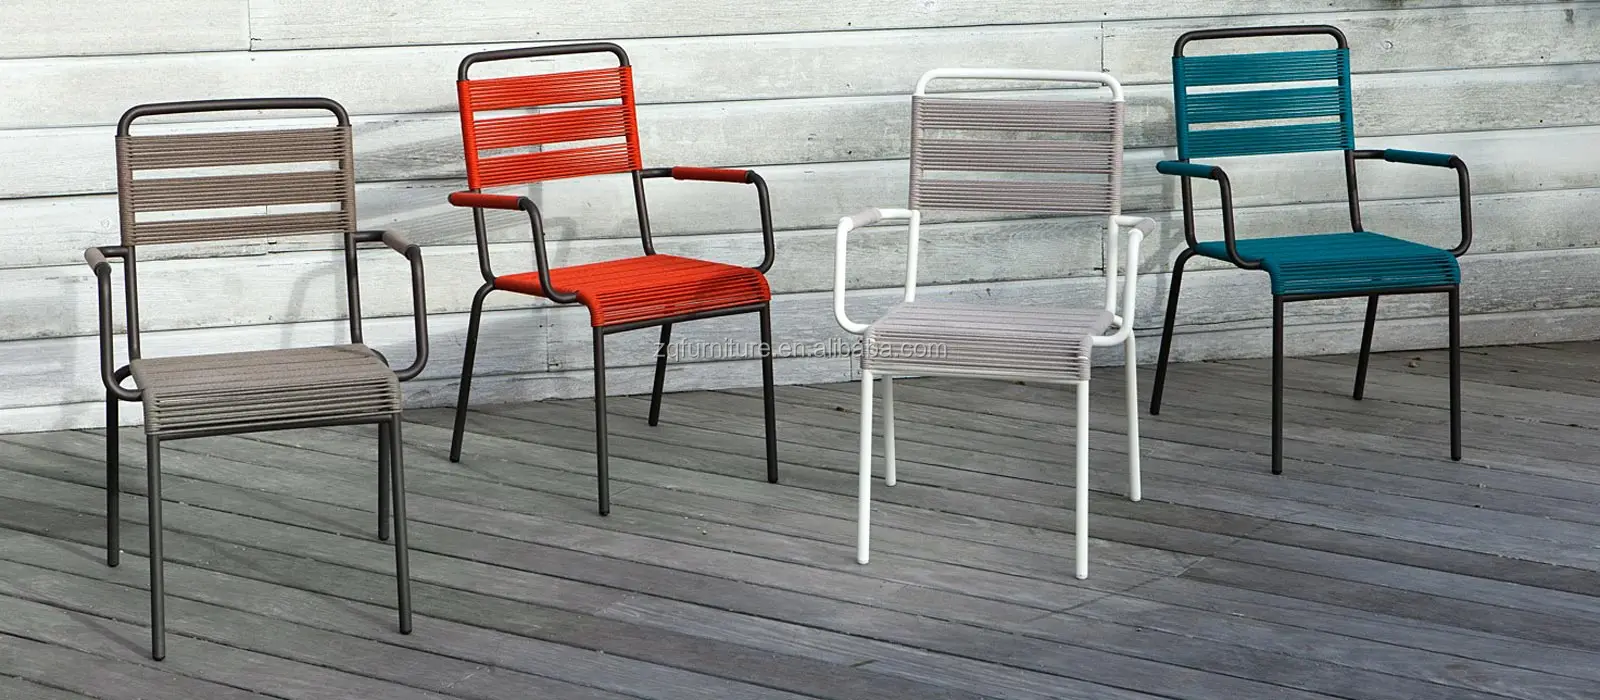 French bistro rattan chairs garden classics outdoor furniture